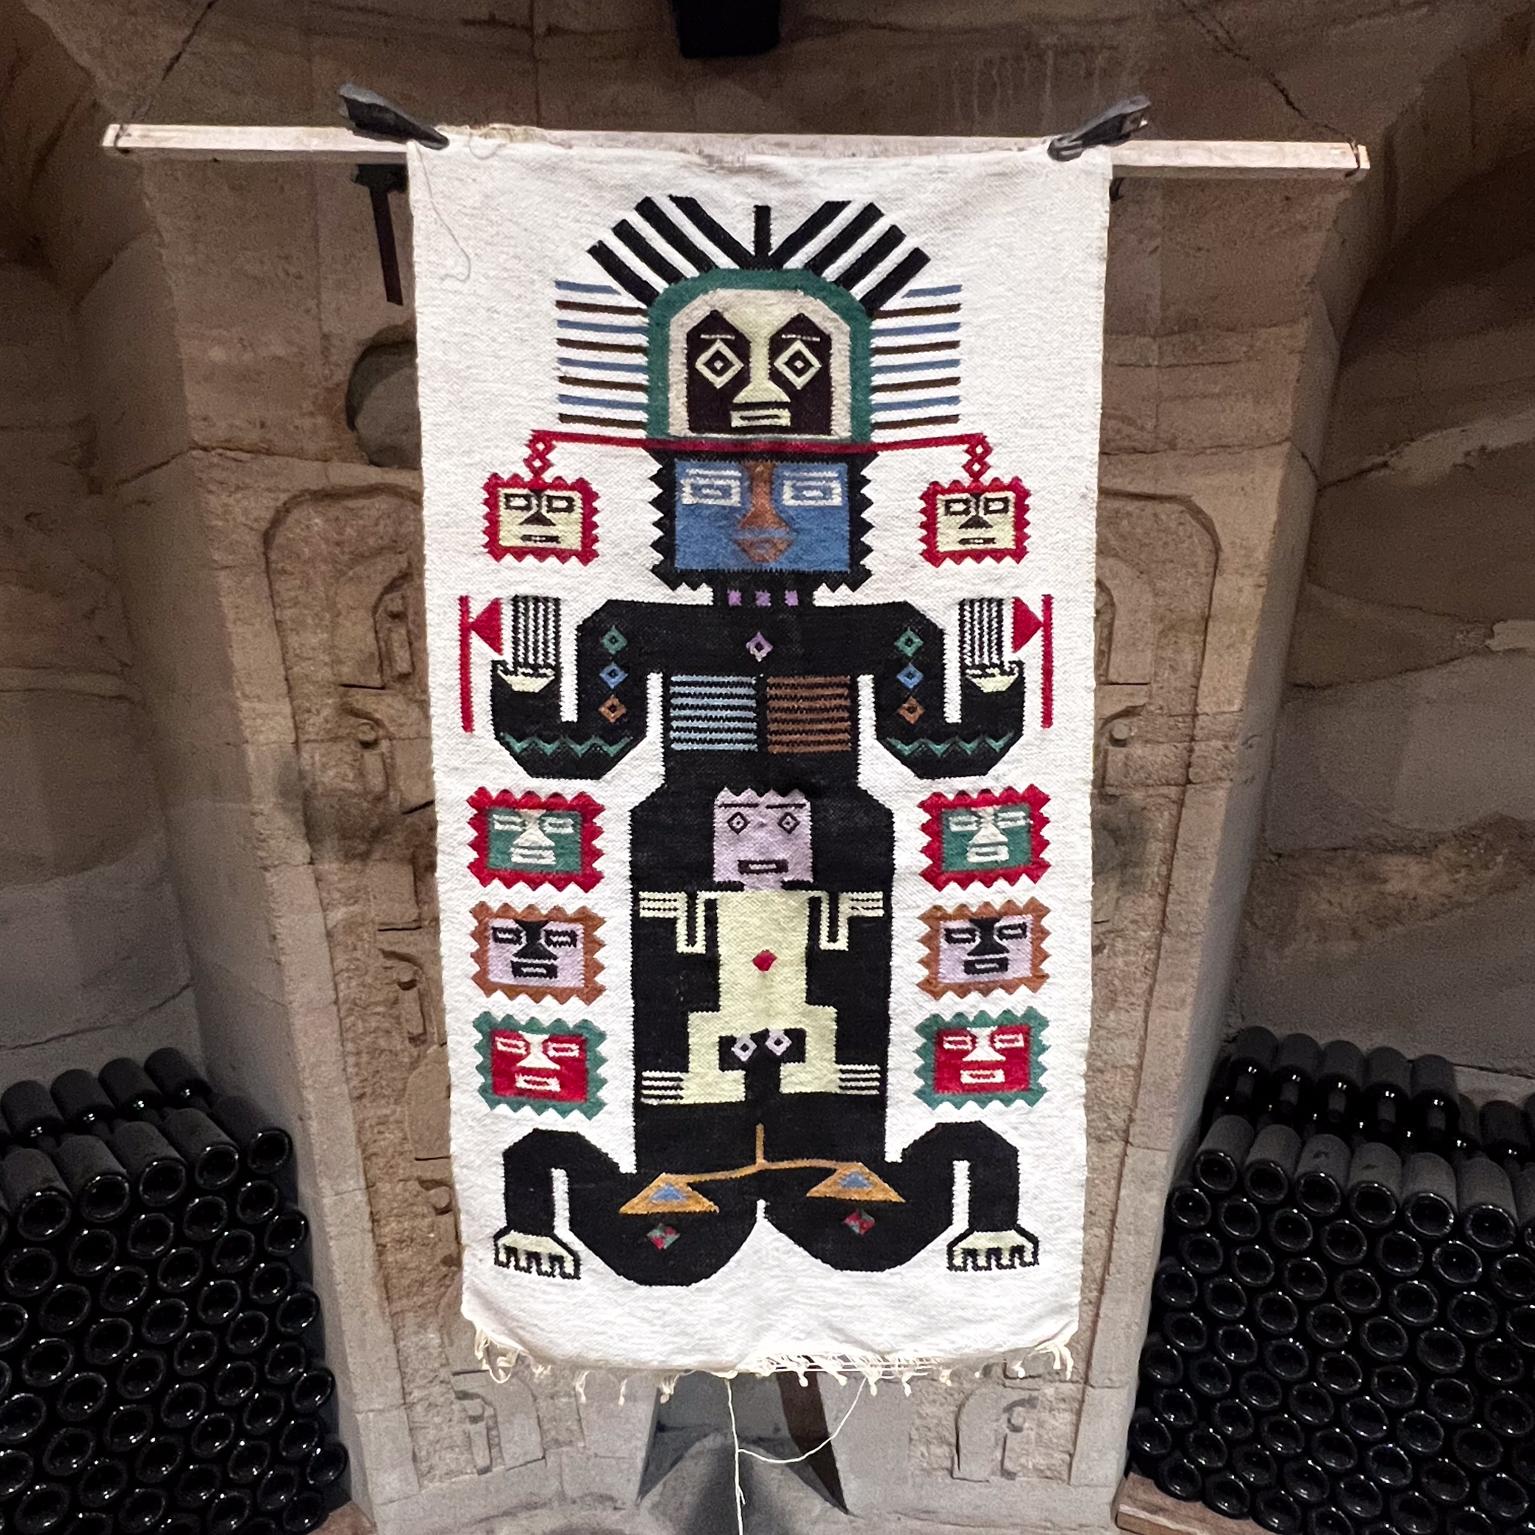 Vintage Textile Wall Art Mexican Mayan Aztec Woven Tapestry
25.25 x 47
Original preowned vintage condition.
Review images provided.
